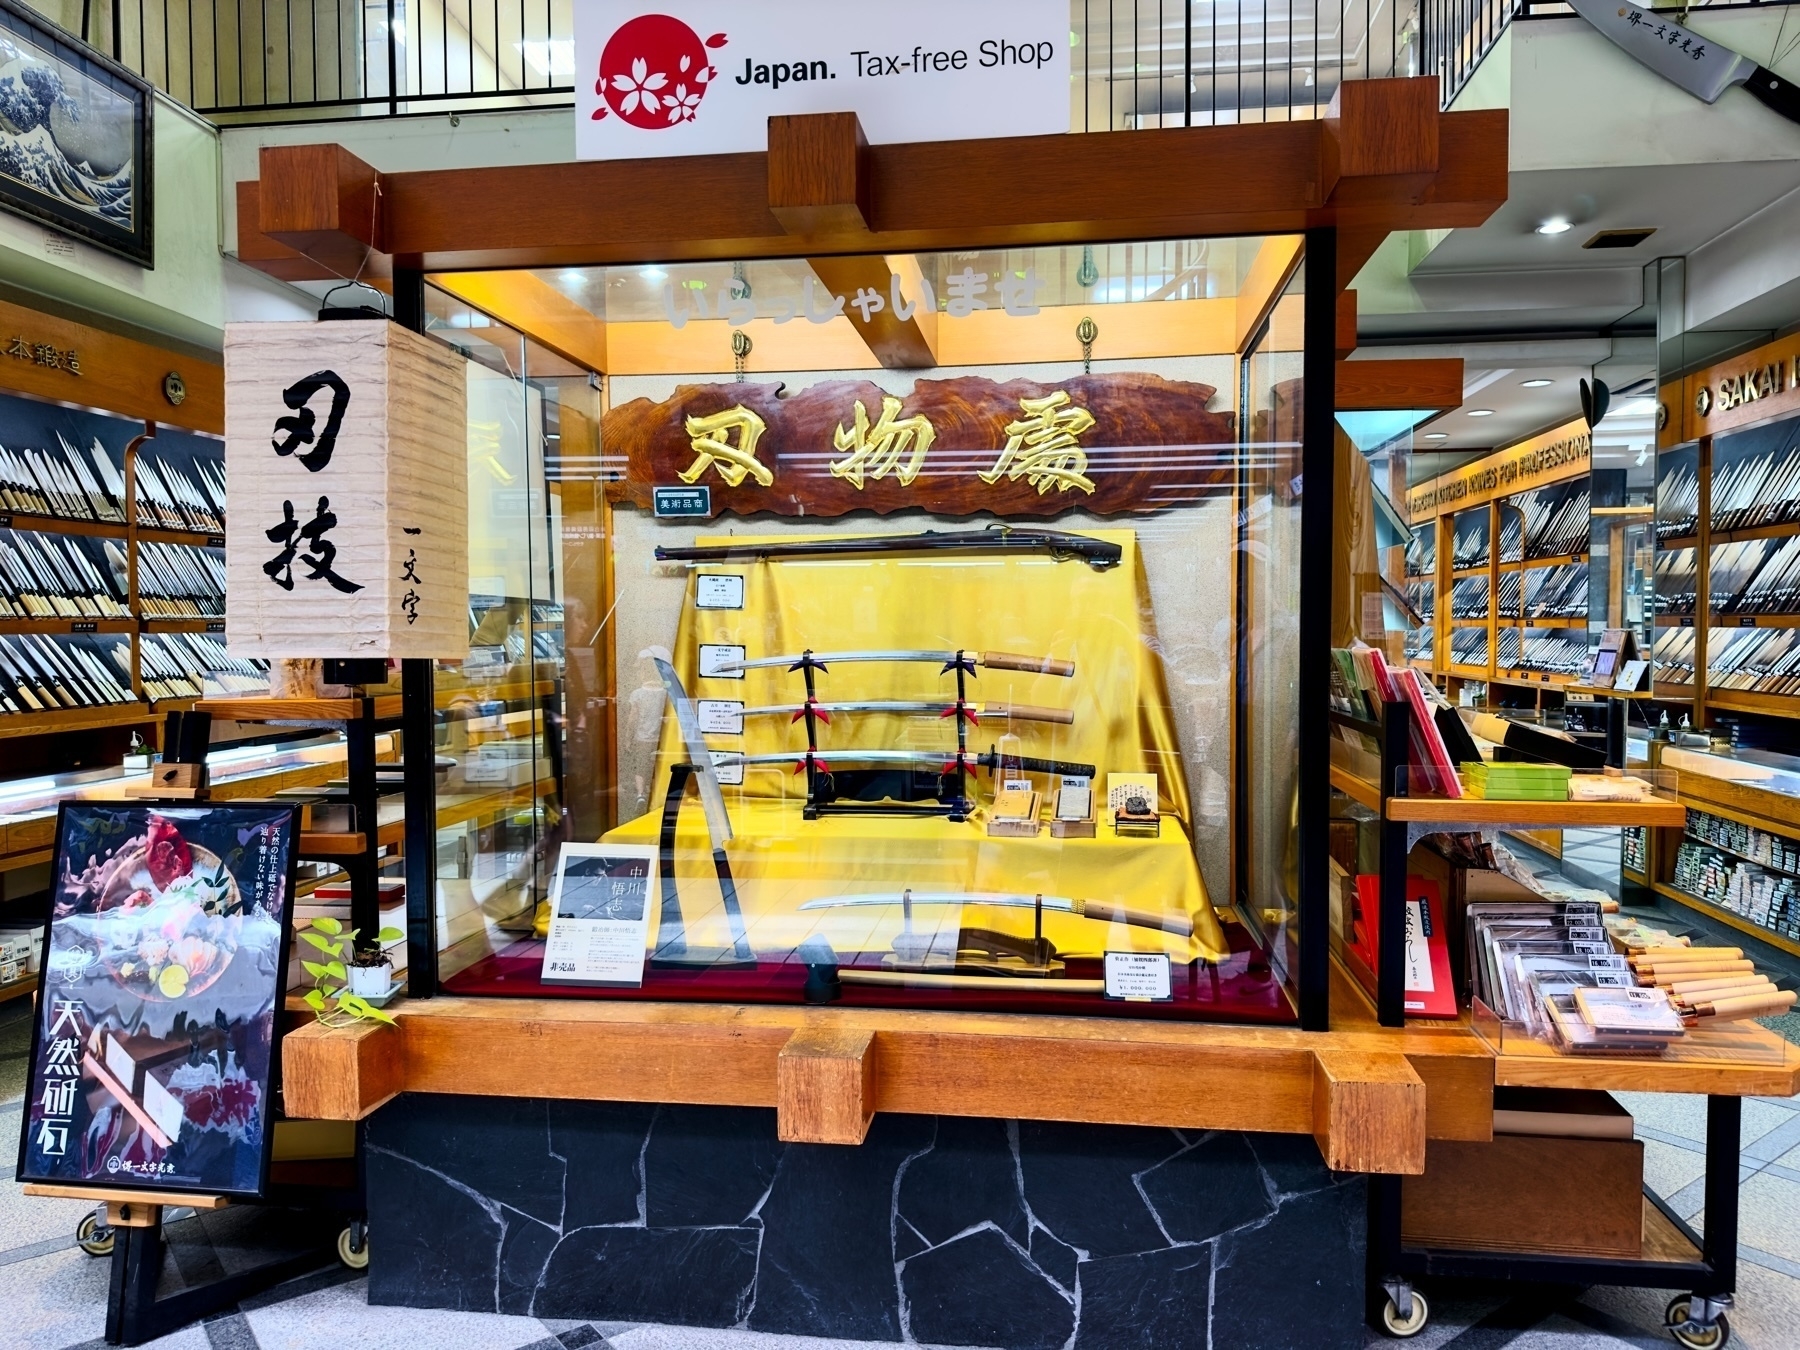 A Japanese shopfront displaying traditional swords and accessories, with signage indicating a tax-free shop in Japan. The exterior features wooden elements and cultural decorations.